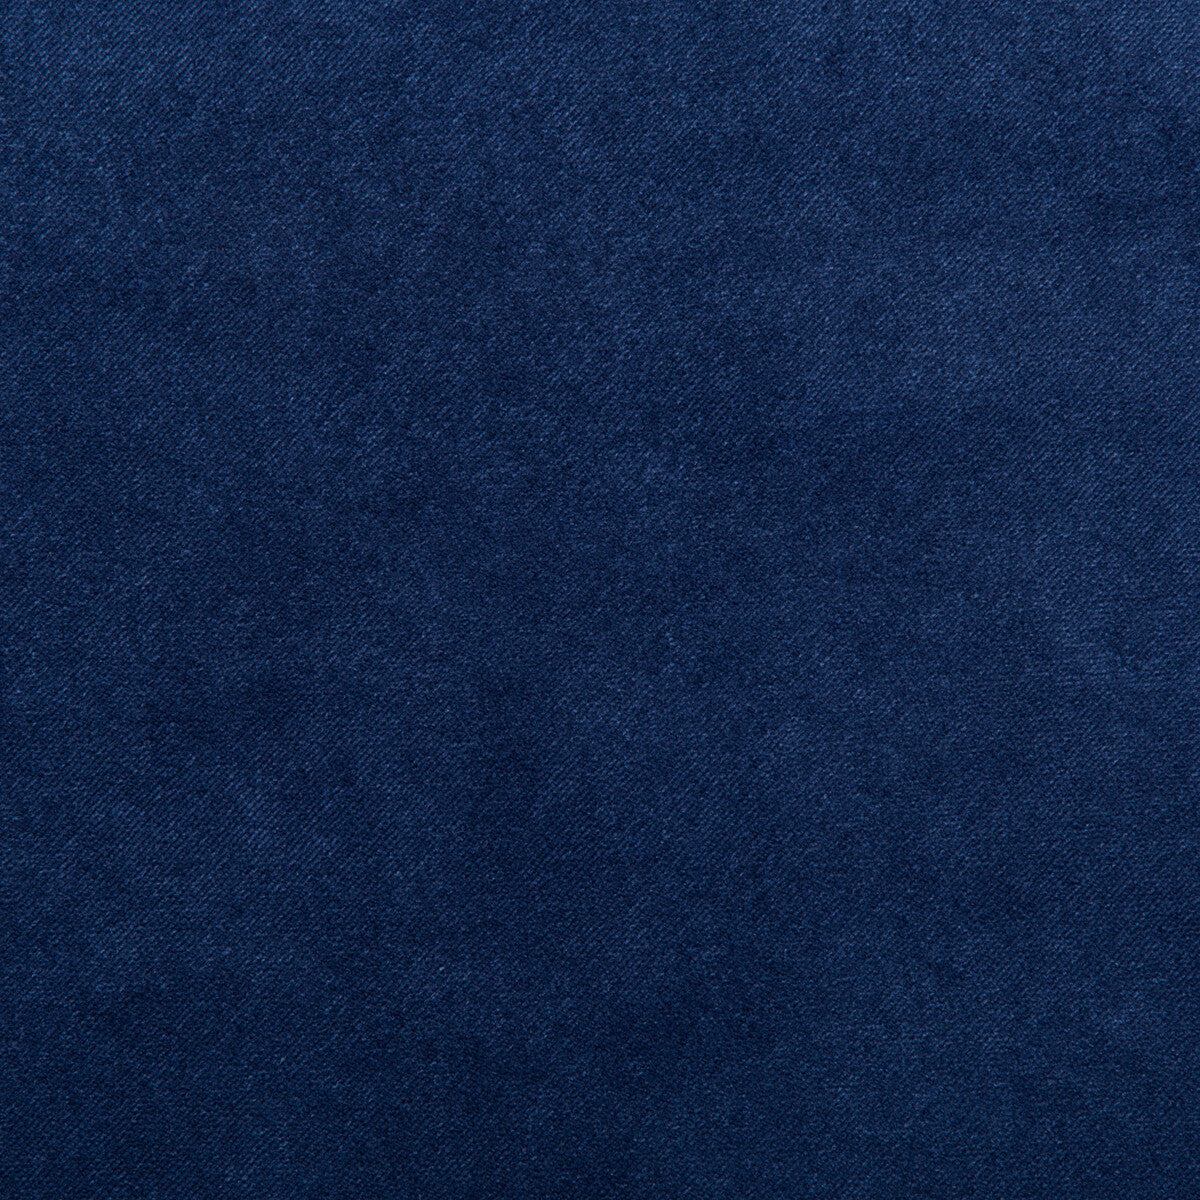 Madison Velvet fabric in royal color - pattern 35402.50.0 - by Kravet Contract